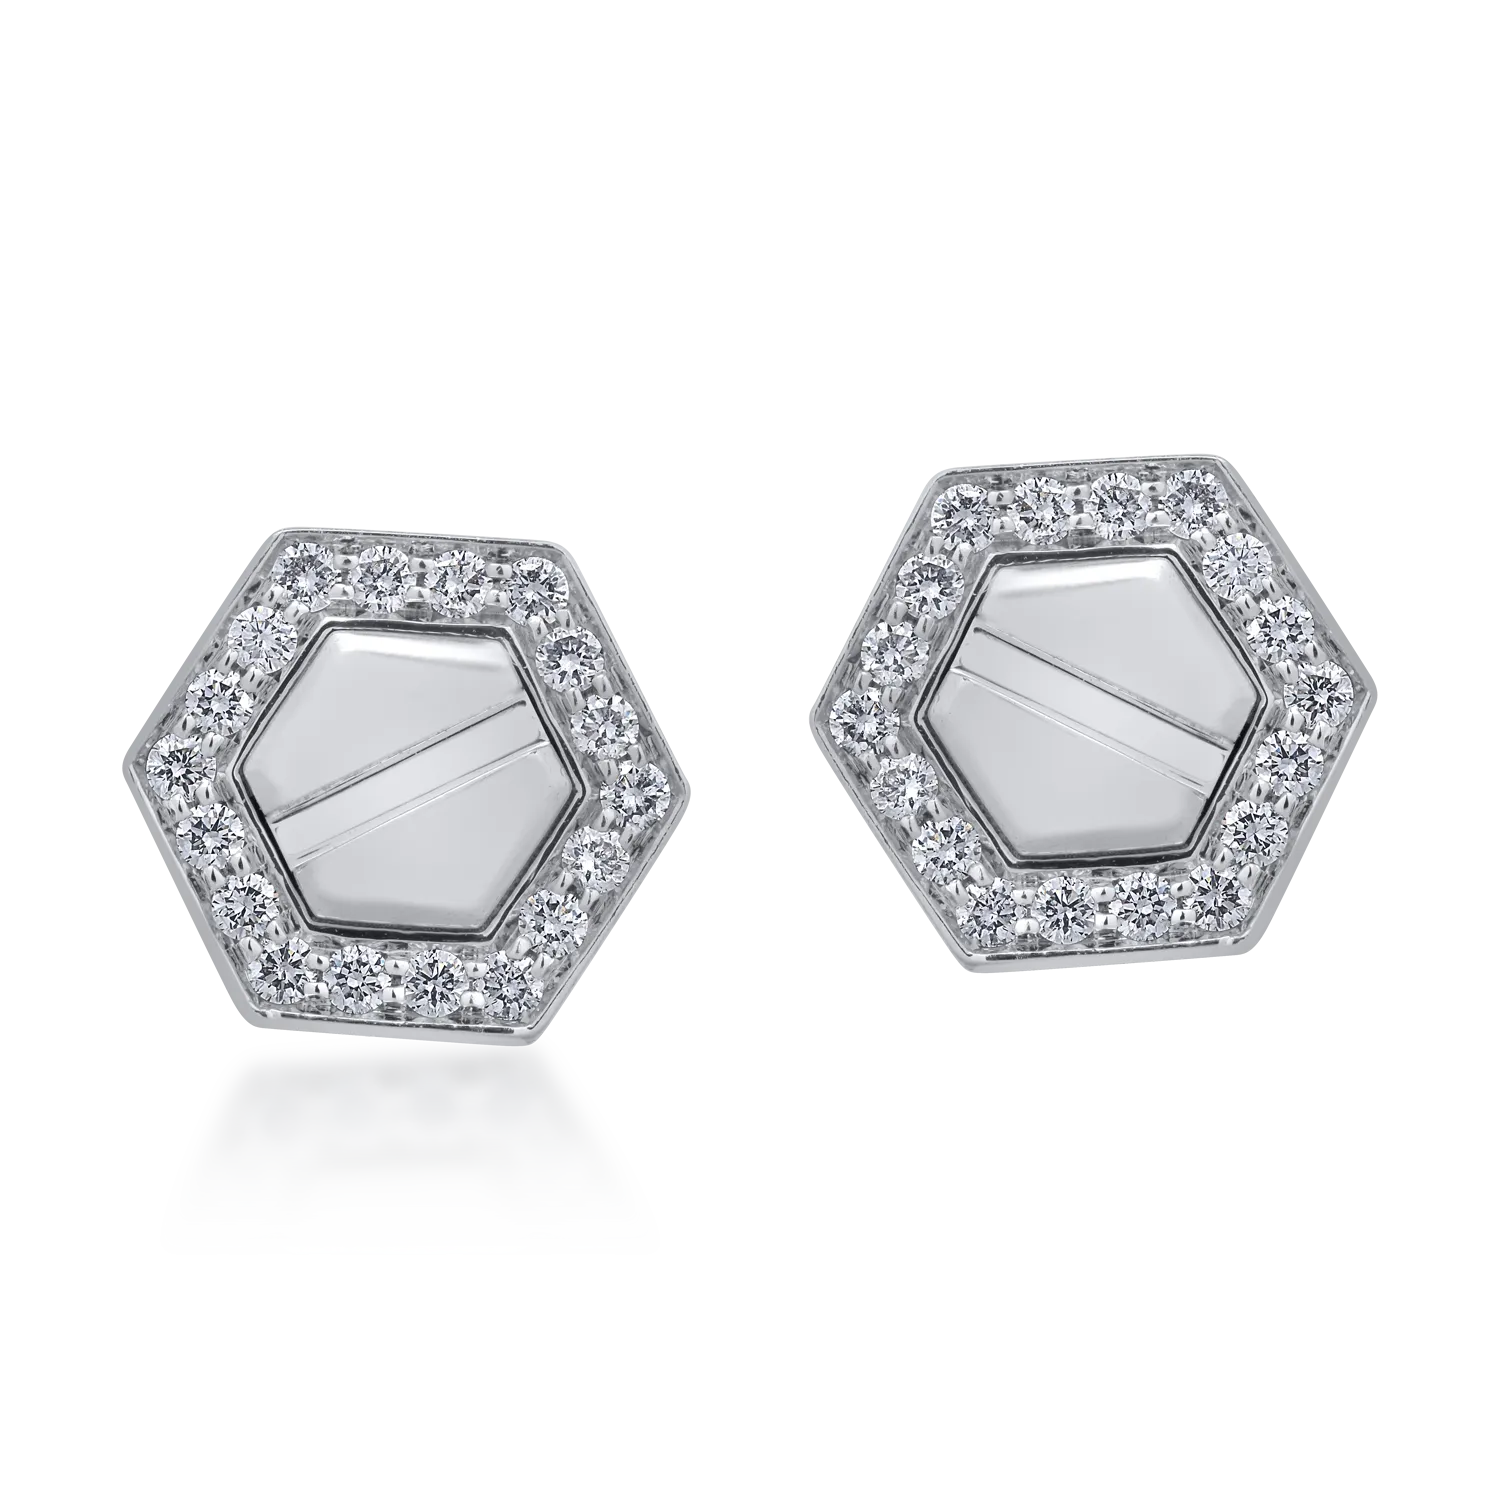 18K white gold earrings with 0.3ct diamonds